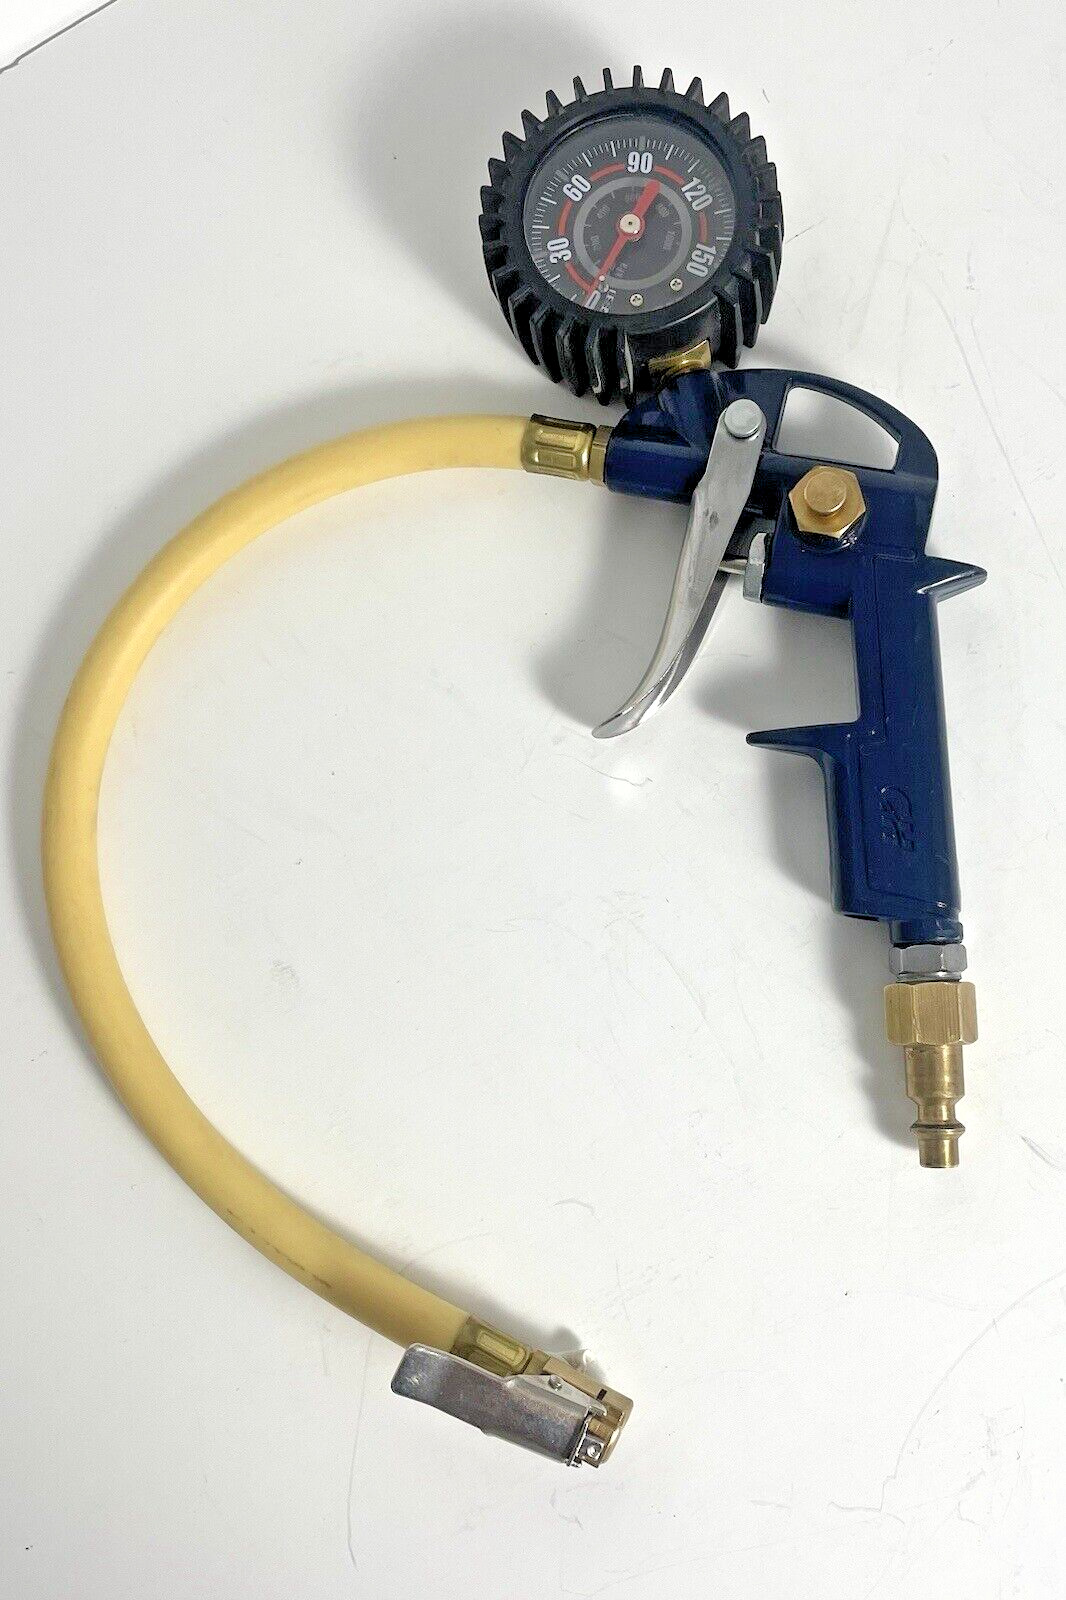 Campbell & Hausfeld Tire Inflator with Gauge